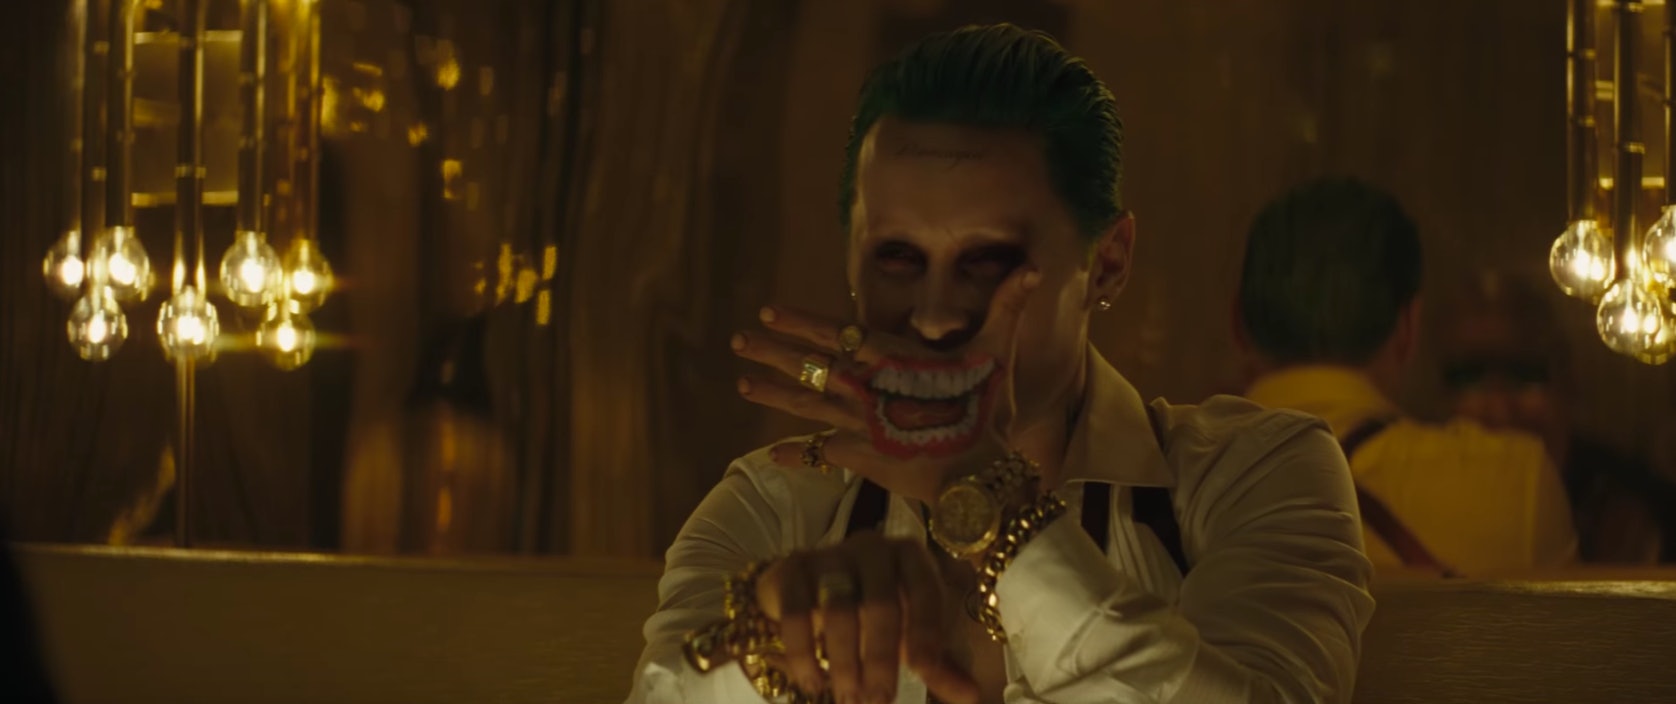 Jared Letos Joker Tattoos Could Spell Out His Real Identity